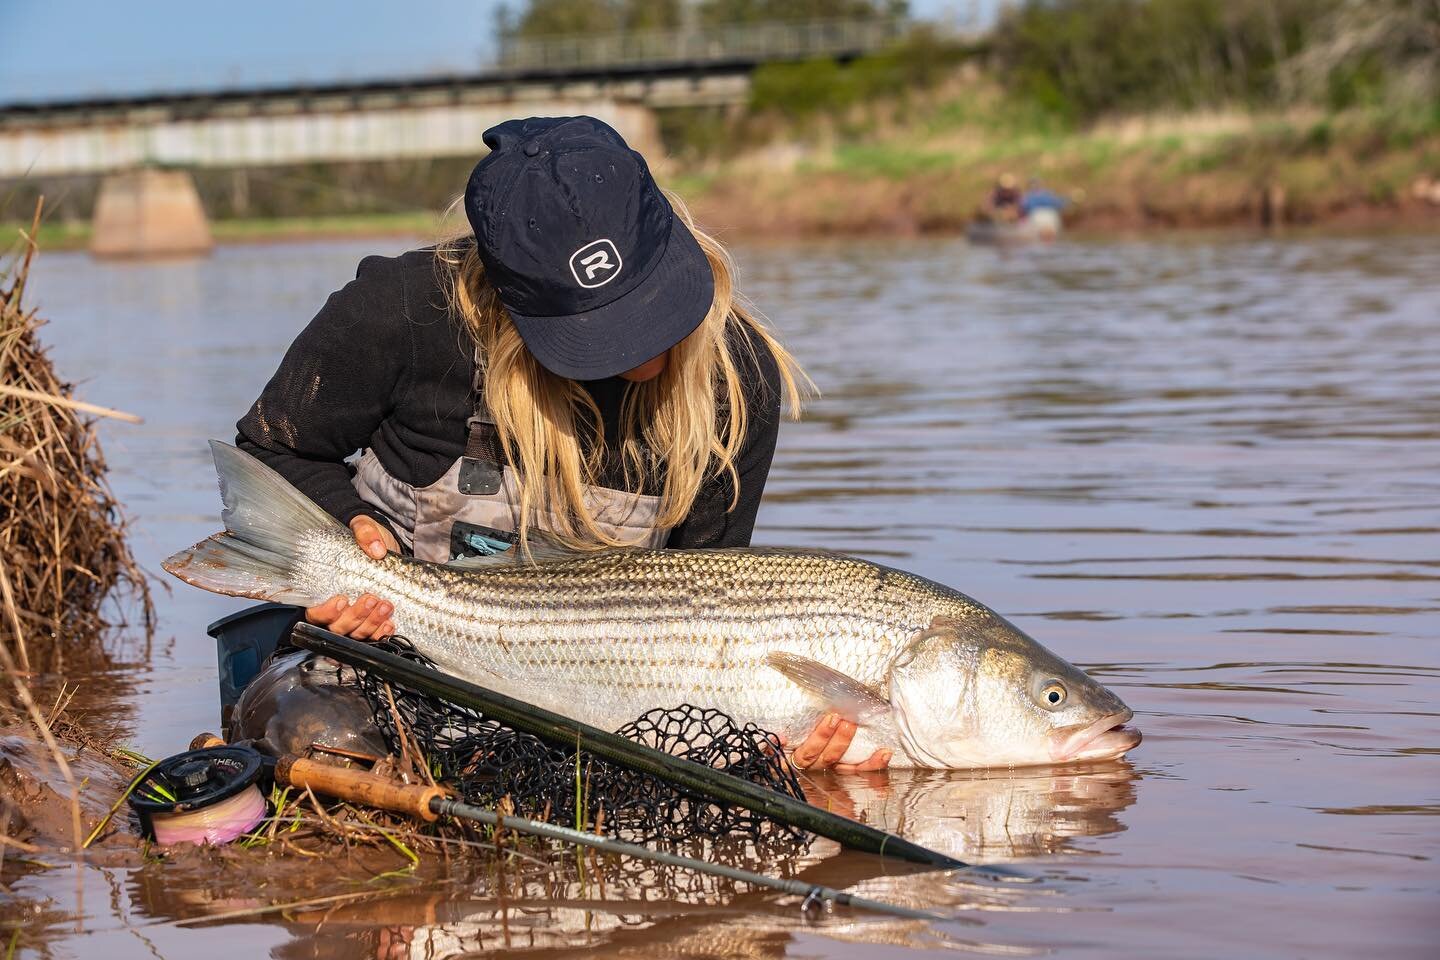 Snow won&rsquo;t get me down! Won&rsquo;t be long now! At this rate, we might still have snow in May though&hellip; @katesherin 
.
.
.
#redingtonsquad #riomaketheconnection #rioambassador #redingtongear #seewhatsoutthere #fishnovascotia #fishing #fly